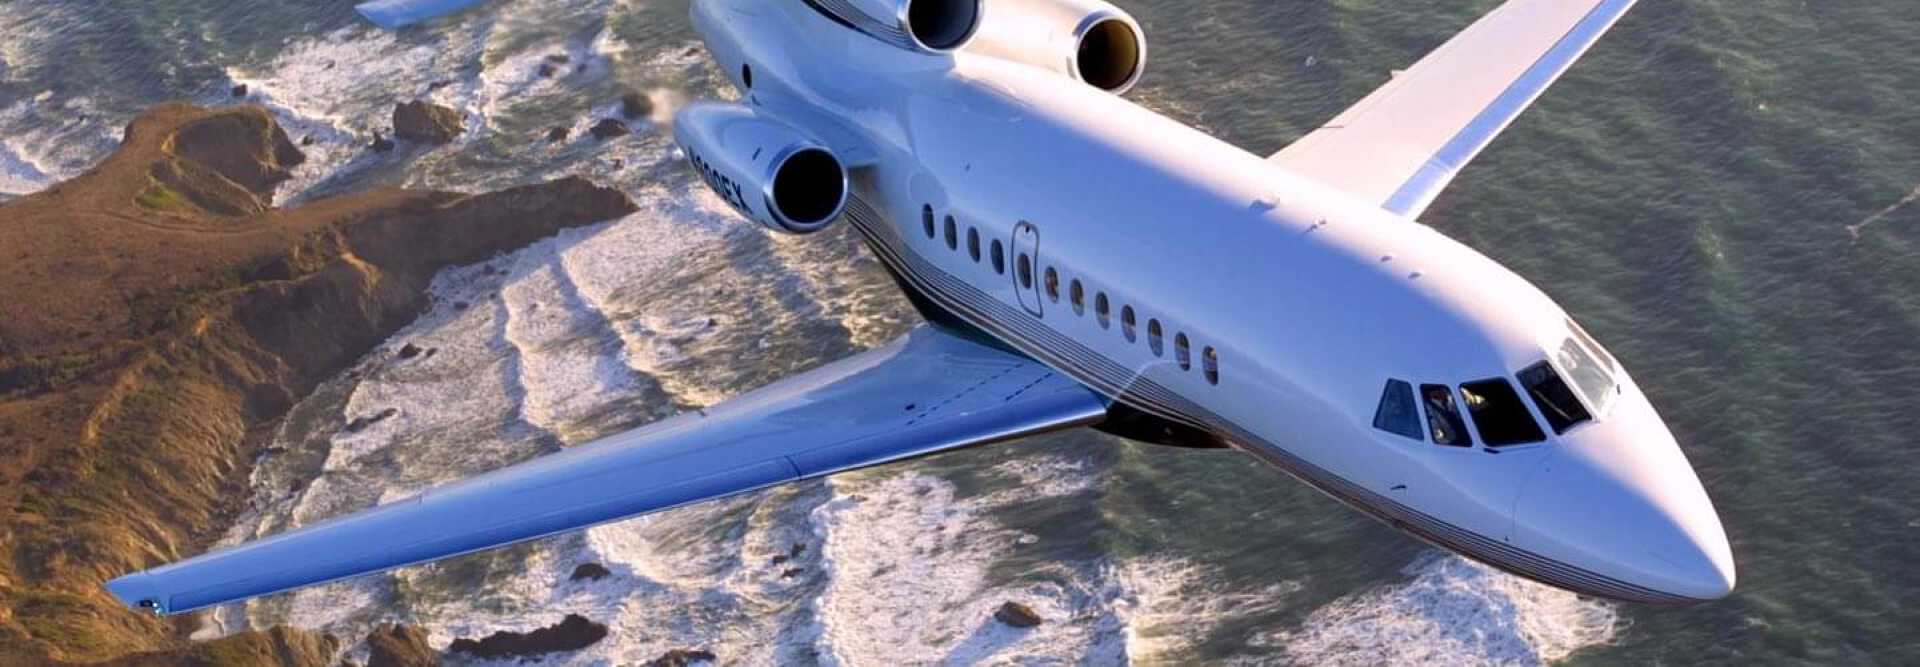 Super Large Business Jet Dassault Falcon 900EX to charter for private aviation flights with LunaJets, upgraded engines, greater fuel capacity